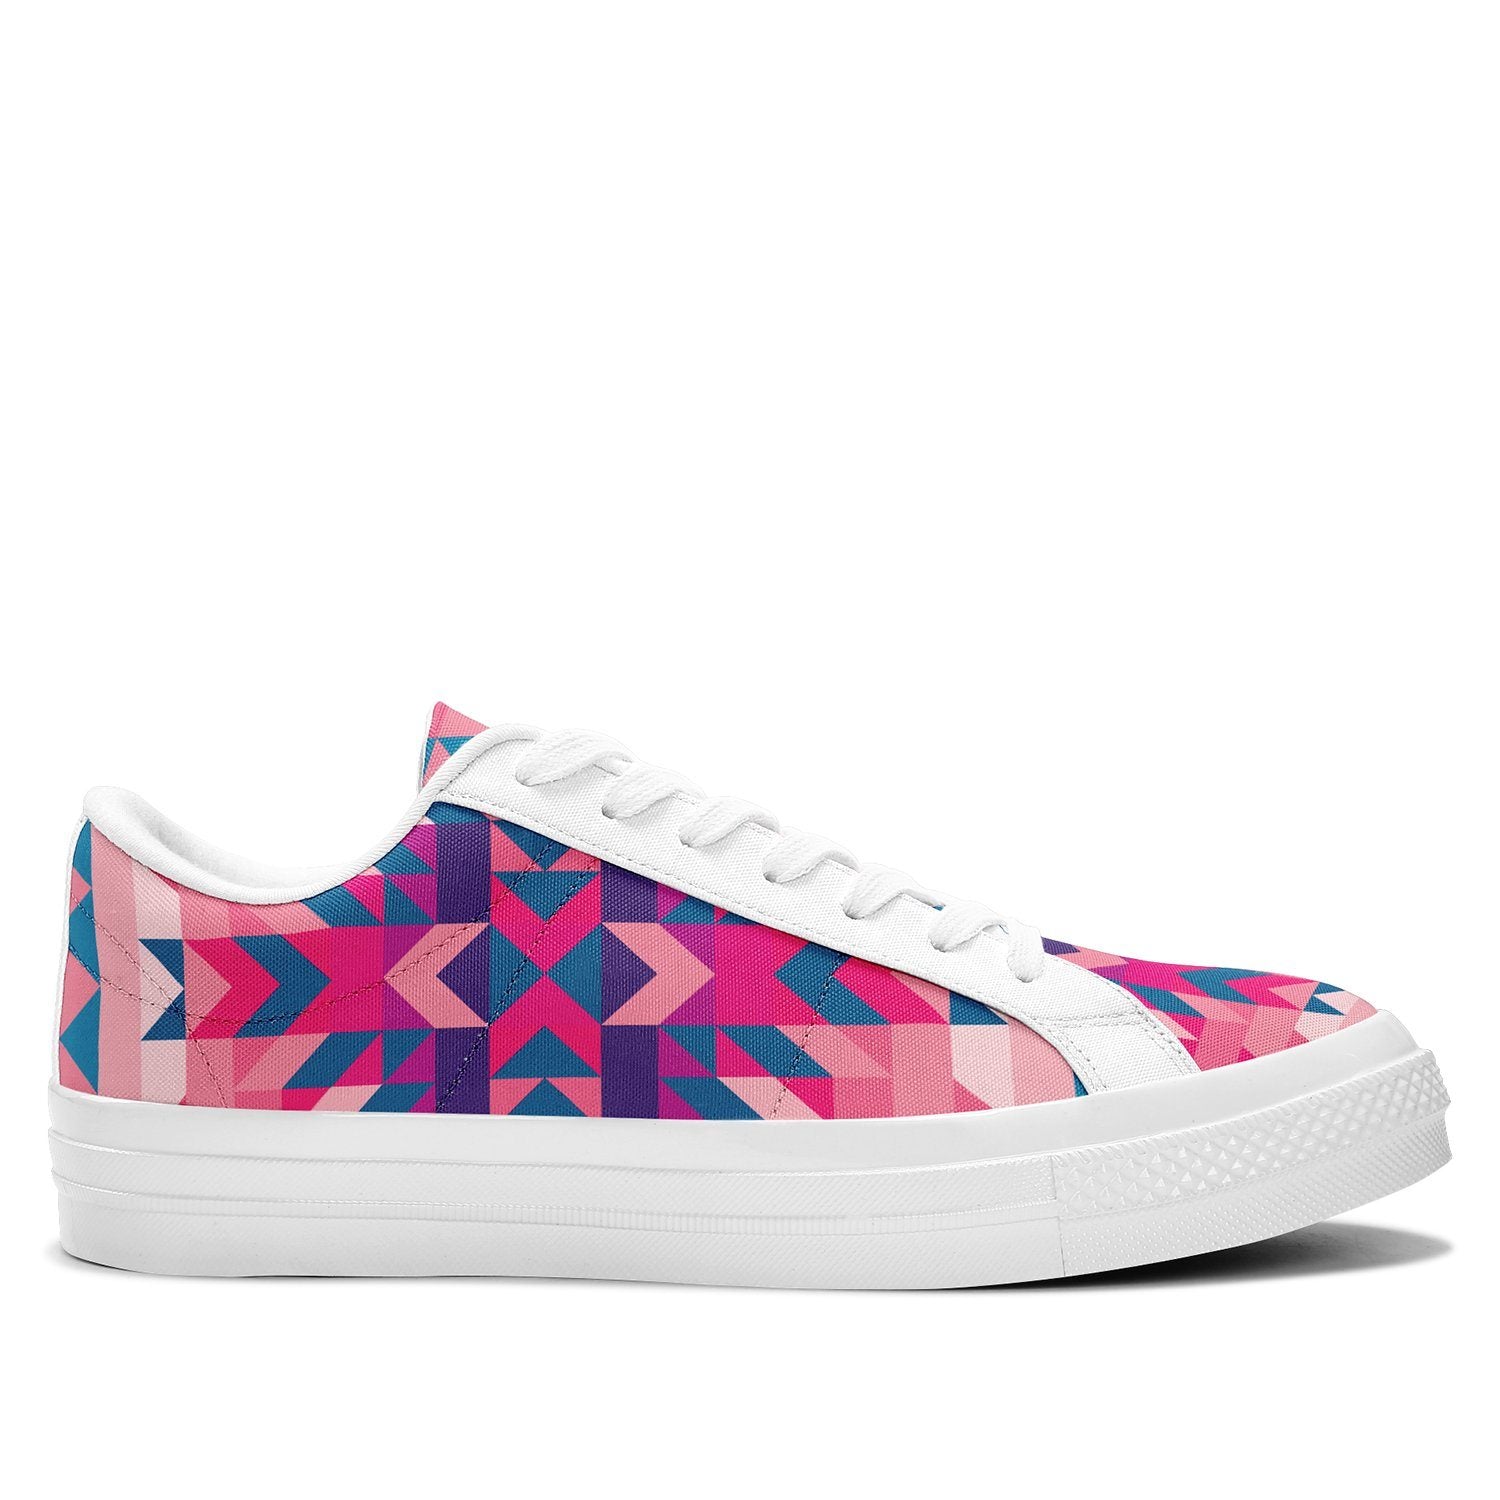 Desert Geo Blue Aapisi Low Top Canvas Shoes White Sole aapisi Herman 